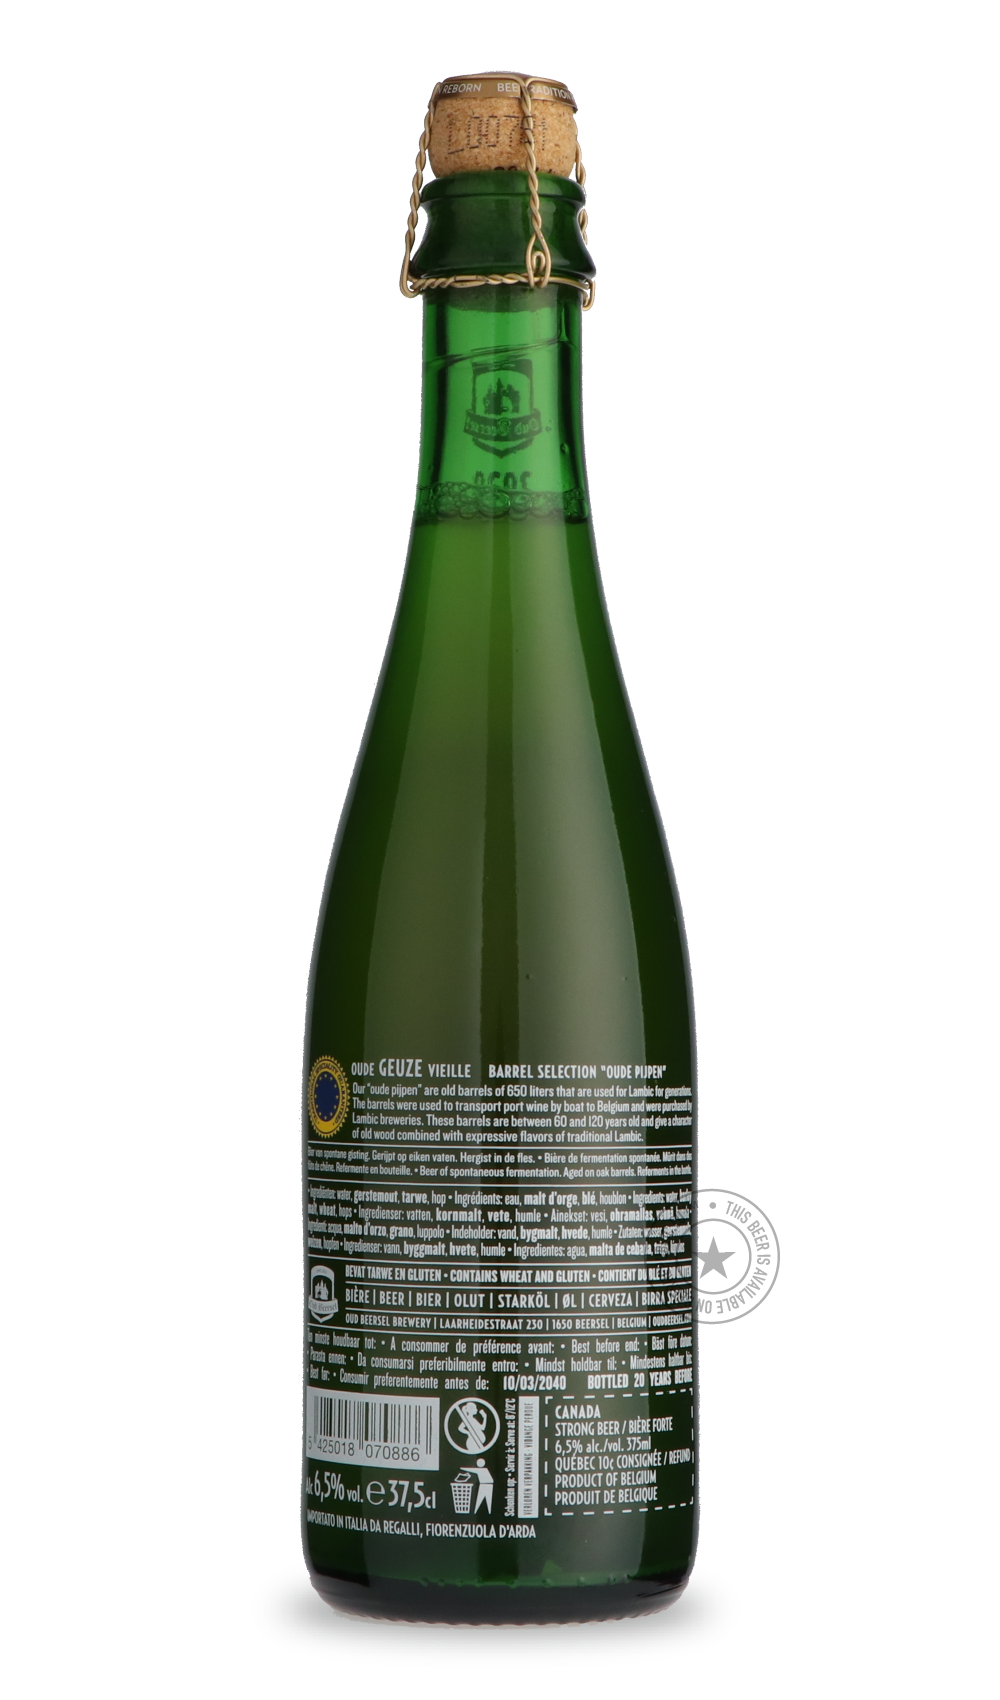 -Oud Beersel- Oude Geuze Vieille - Barrel Selection Oude Pijpen (2020)-Sour / Wild & Fruity- Only @ Beer Republic - The best online beer store for American & Canadian craft beer - Buy beer online from the USA and Canada - Bier online kopen - Amerikaans bier kopen - Craft beer store - Craft beer kopen - Amerikanisch bier kaufen - Bier online kaufen - Acheter biere online - IPA - Stout - Porter - New England IPA - Hazy IPA - Imperial Stout - Barrel Aged - Barrel Aged Imperial Stout - Brown - Dark beer - Blond